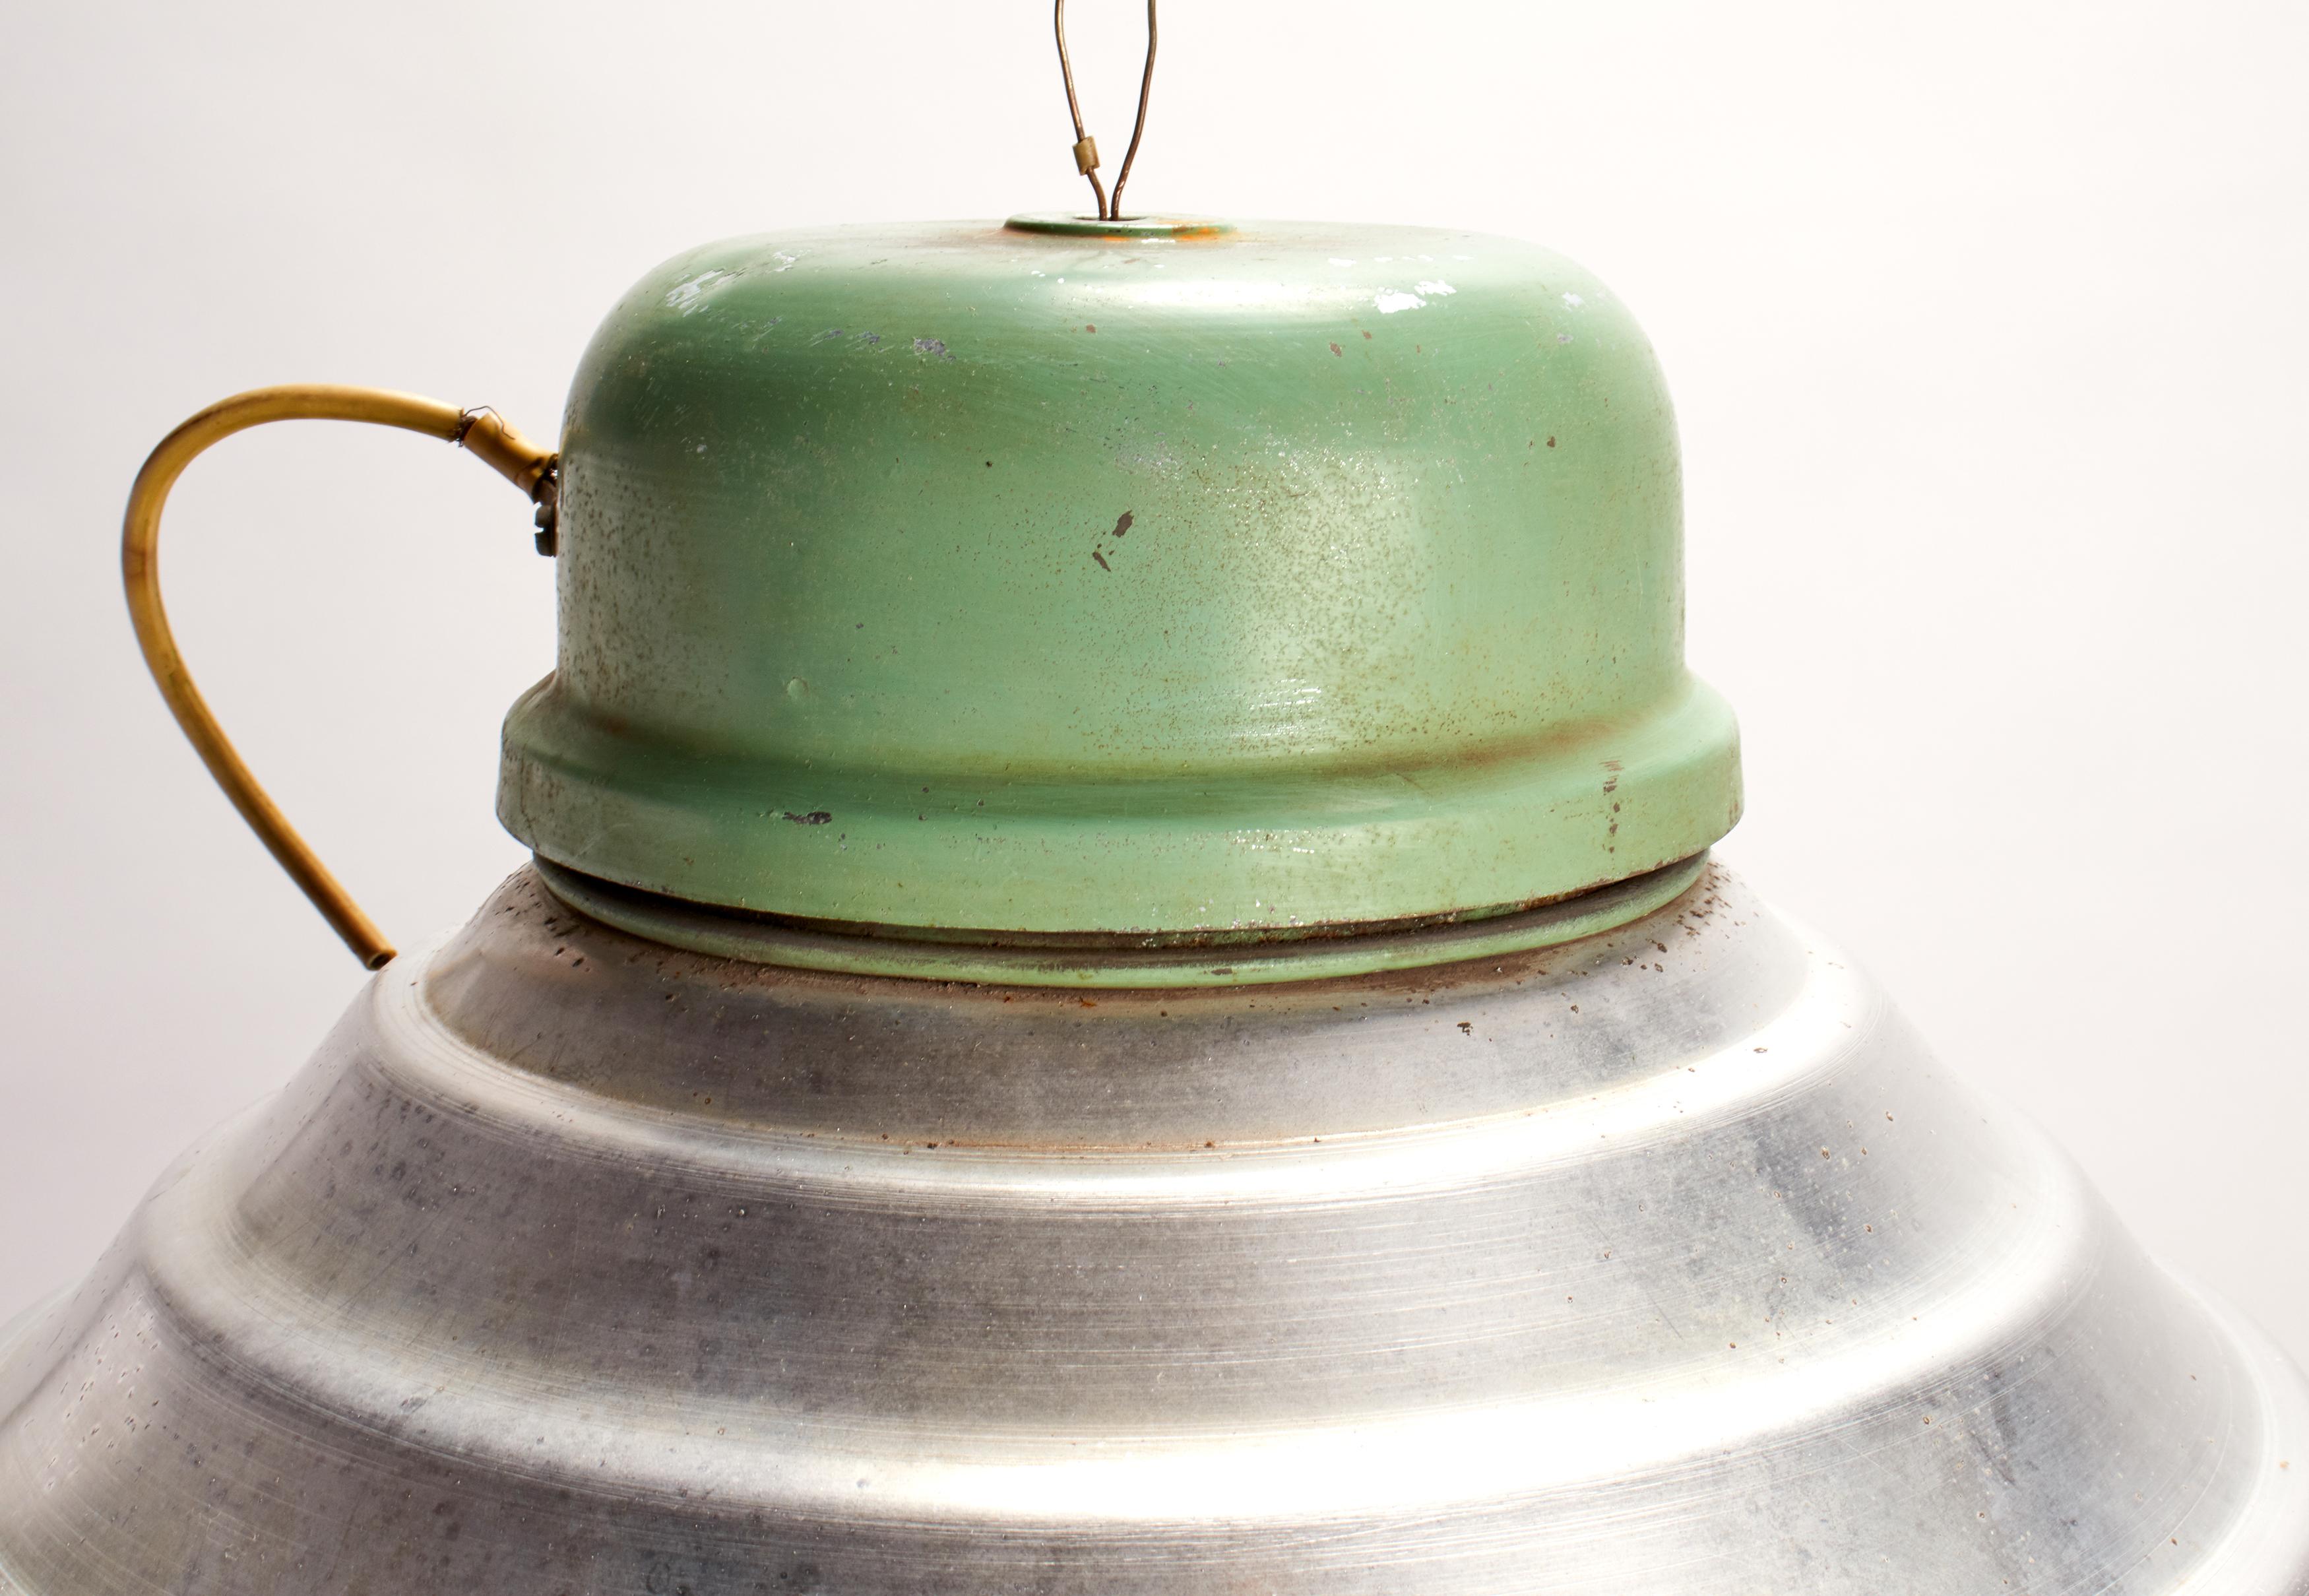 A Group of swinging industrial lamps, green enamel over aluminum dome. Iron hanging hook, porcelain wheel metal wire. Sold also separately, Italy, circa 1920.